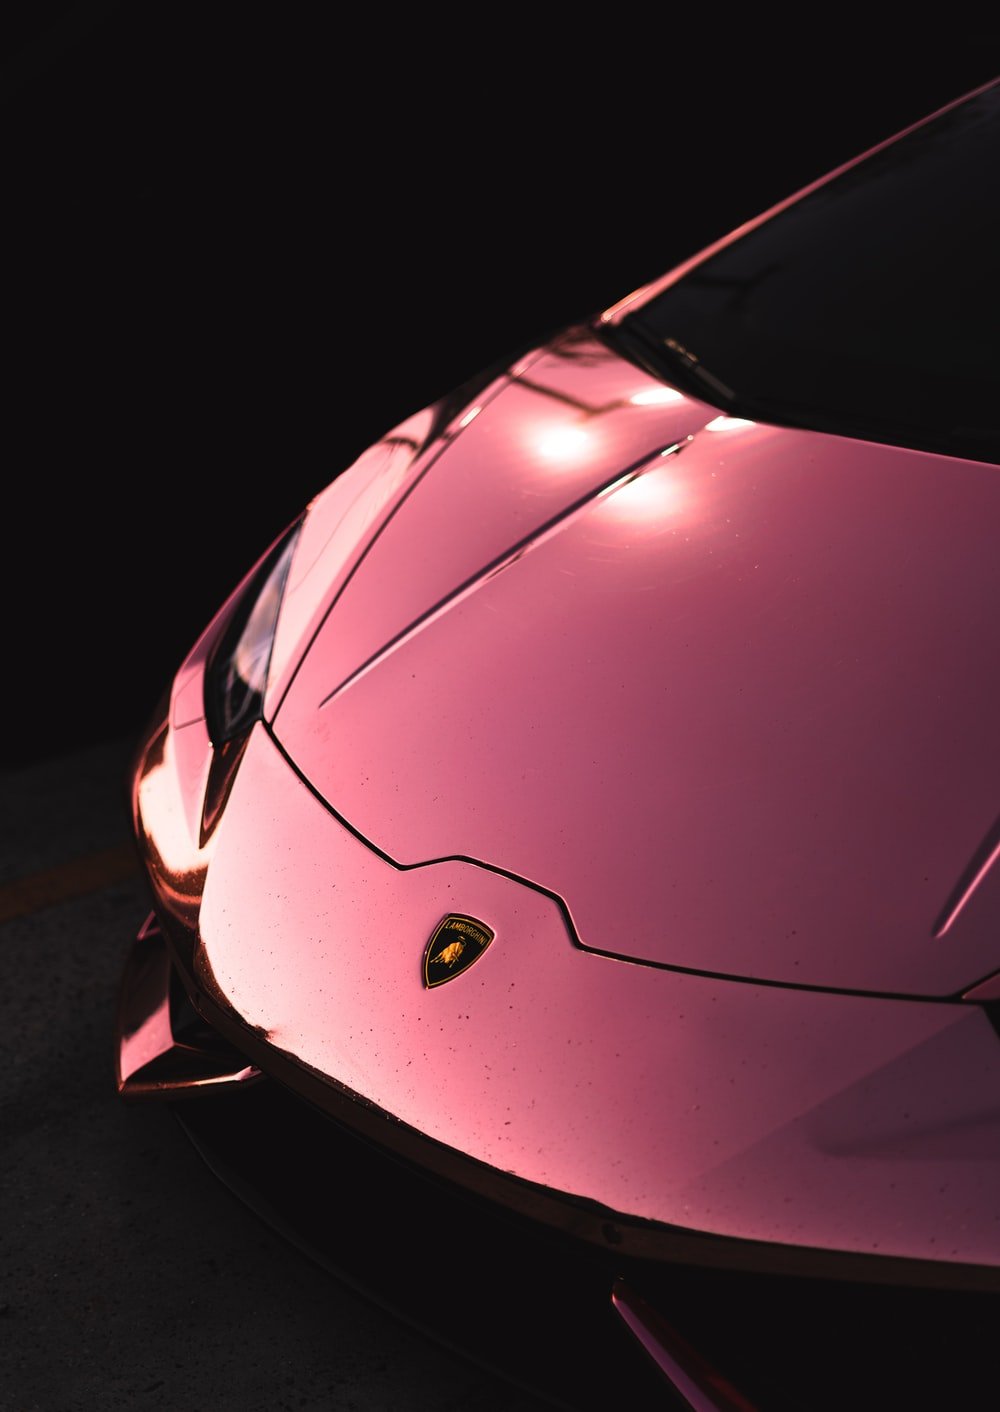 Pink Car Picture. Download Free Image